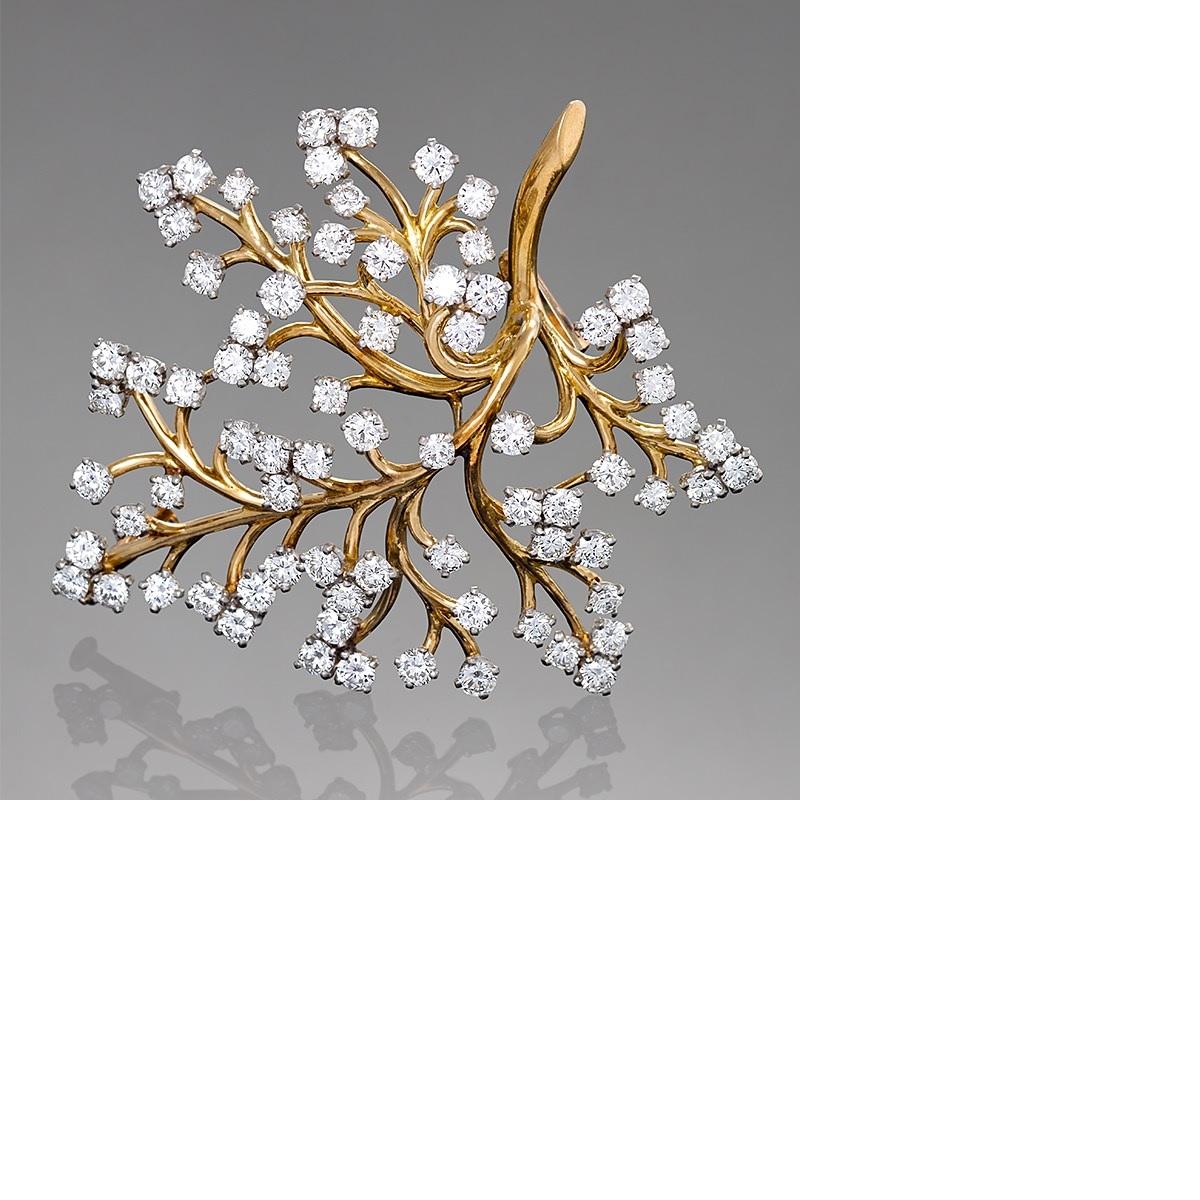 A French Mid-20th Century 18 karat gold 'Capillaire' brooch with diamonds by Van Cleef & Arpels. The brooch has 74 round diamonds with an approximate total weight of 6.00 carats, E/F/G color, VS clarity.  Circa 1959.

A similar brooch is pictured in